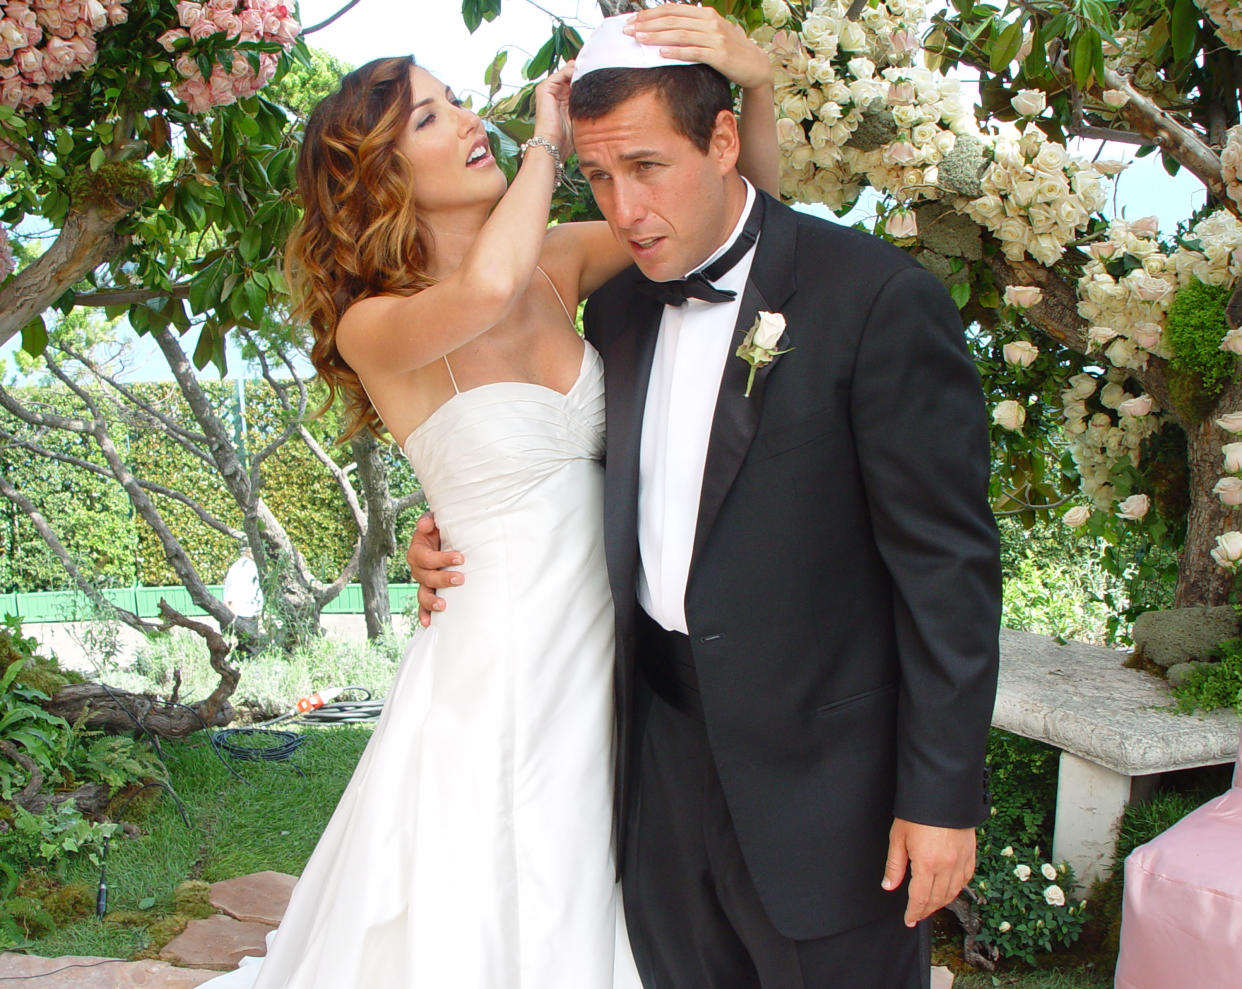 MALIBU, CA - JUNE 22:  In this handout photo, Adam Sandler poses with his bride model-actress Jackie Titone at their wedding June 22, 2003 in Malibu, California. (Photo by Nick Gossen Courtesy of AdamSandler.com/Getty Images) 